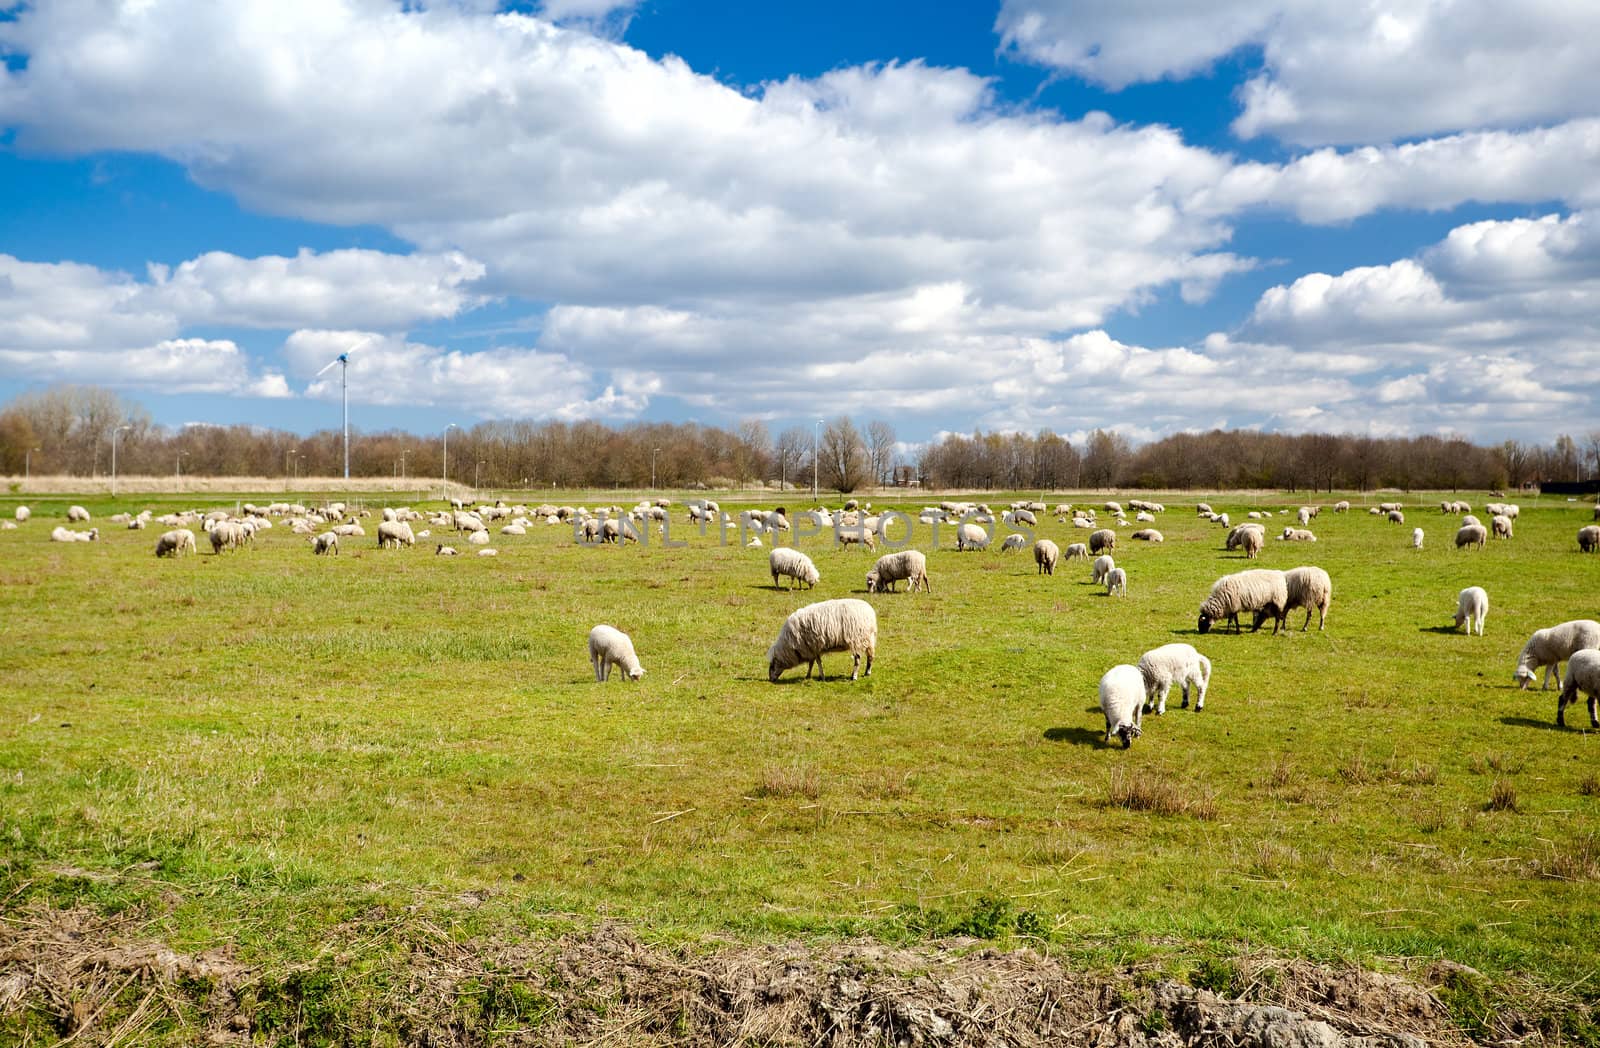 Dutch pasture with many white sheeps under blue sky with clouds